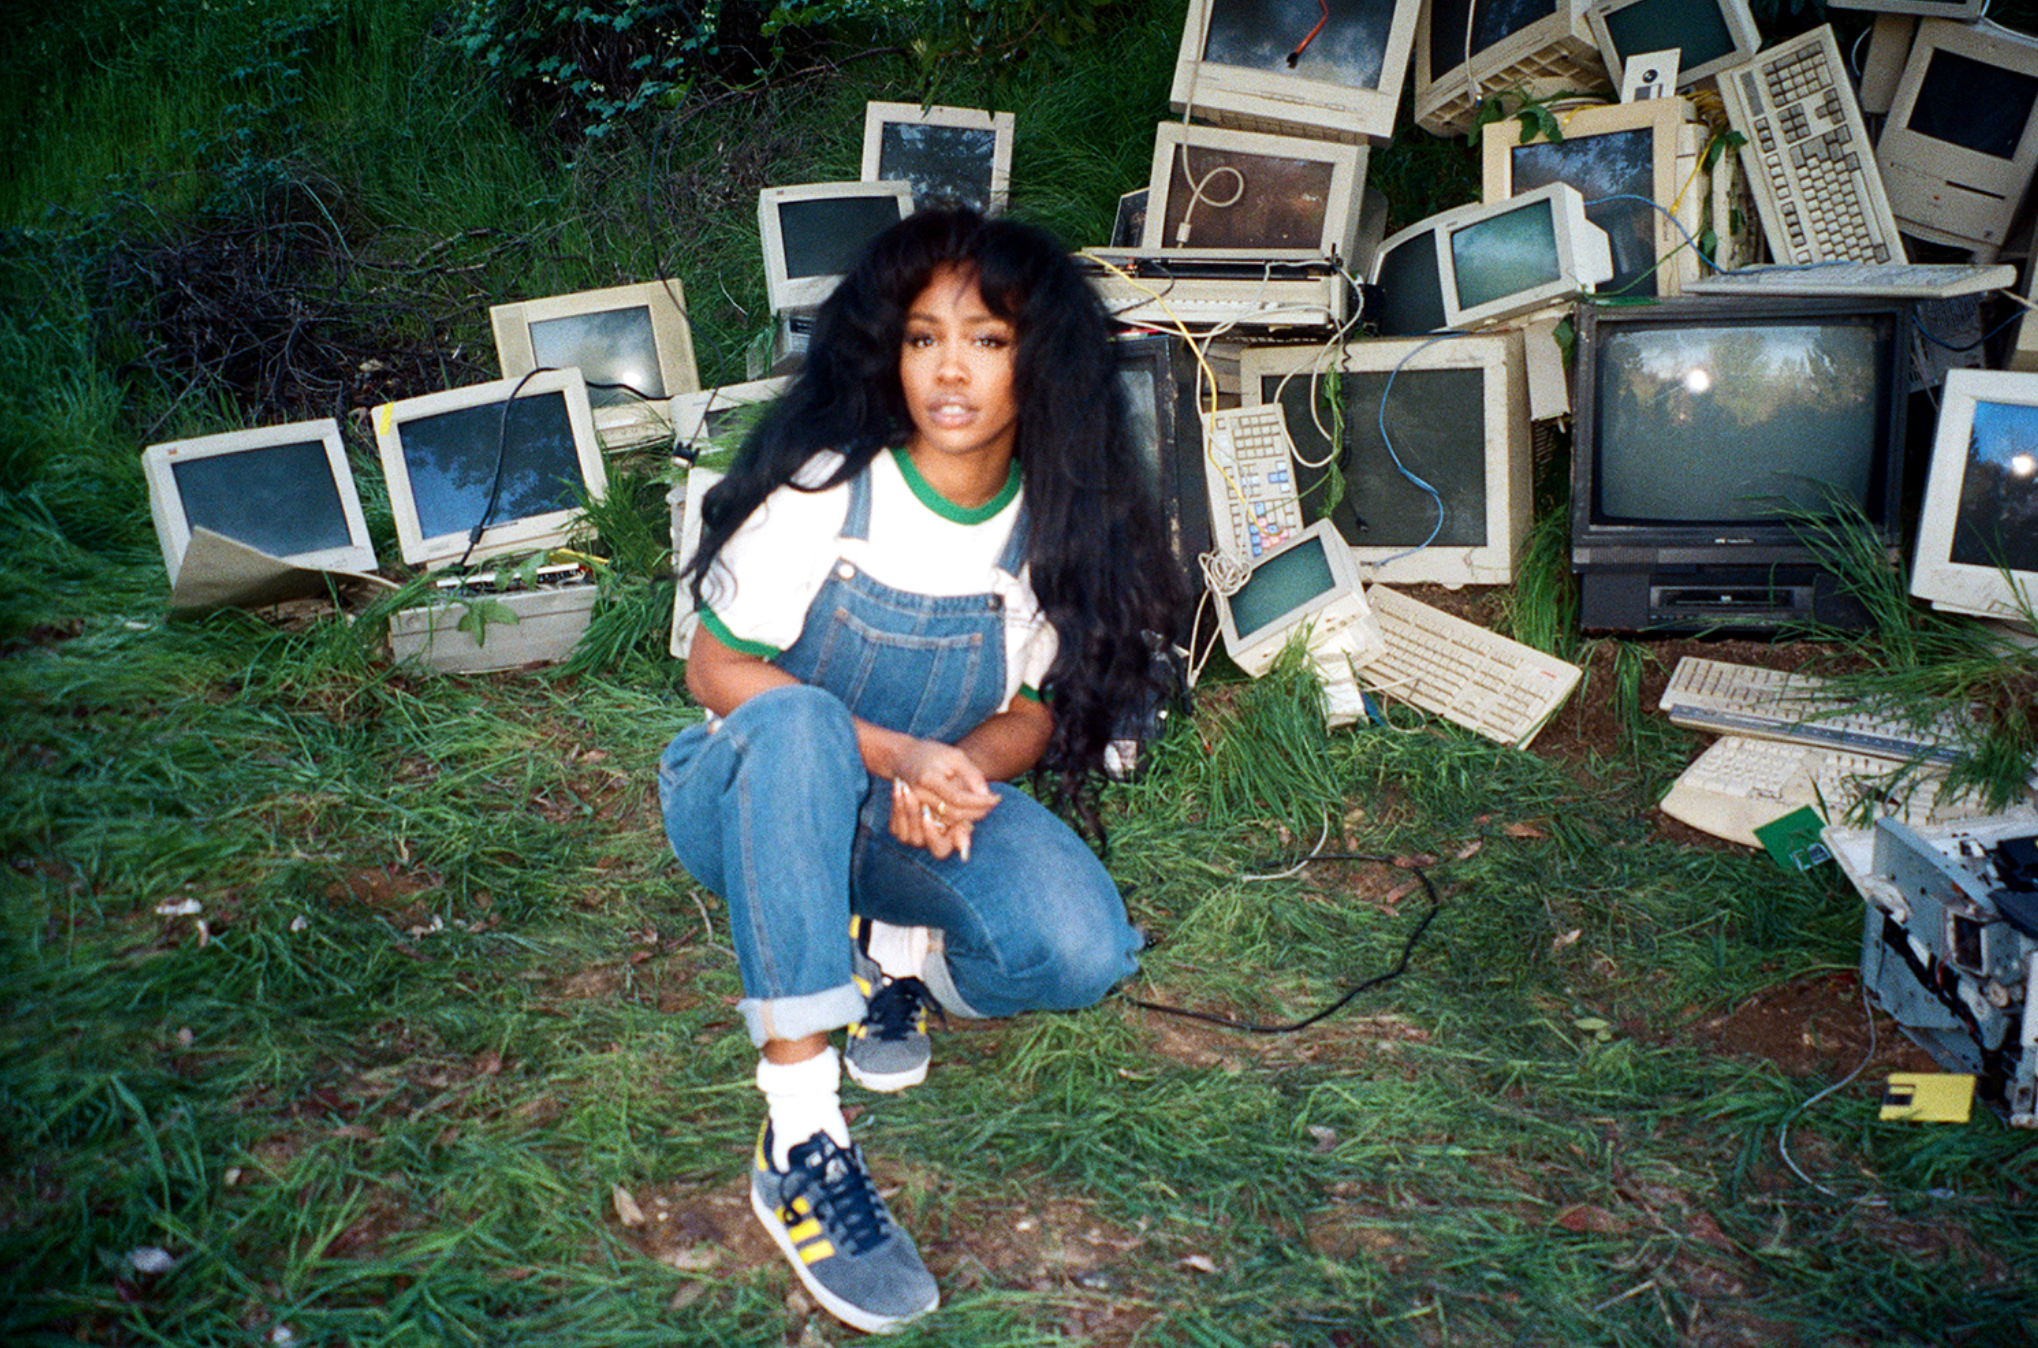 ursday, SZA released the deluxe version of her debut album, Ctrl, in honor of its fifth anniversary. The album contains seven unreleased tracks.